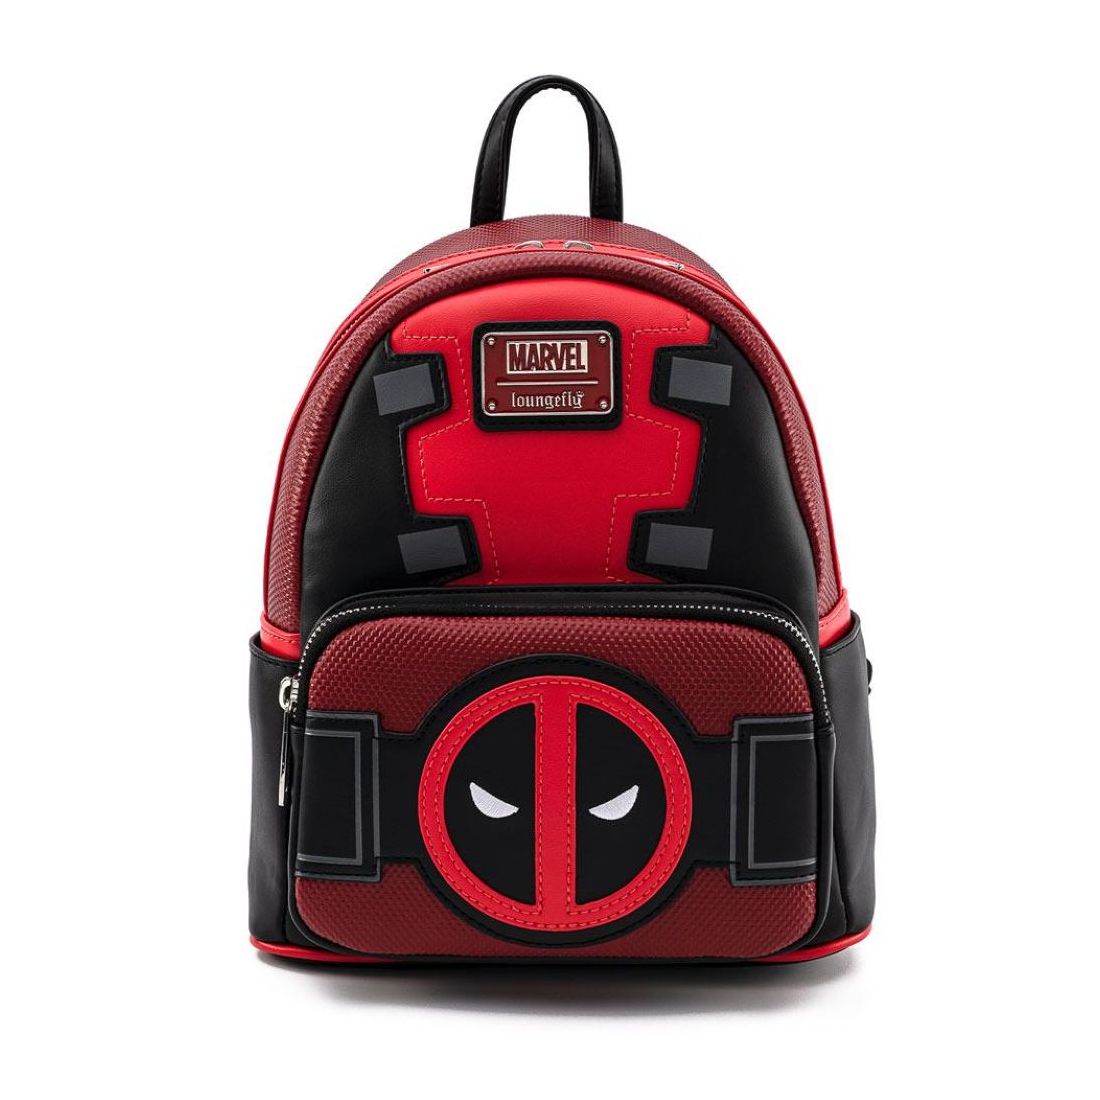 Loungefly Marvel Deadpool Merc With A Mouth Mini Backpack